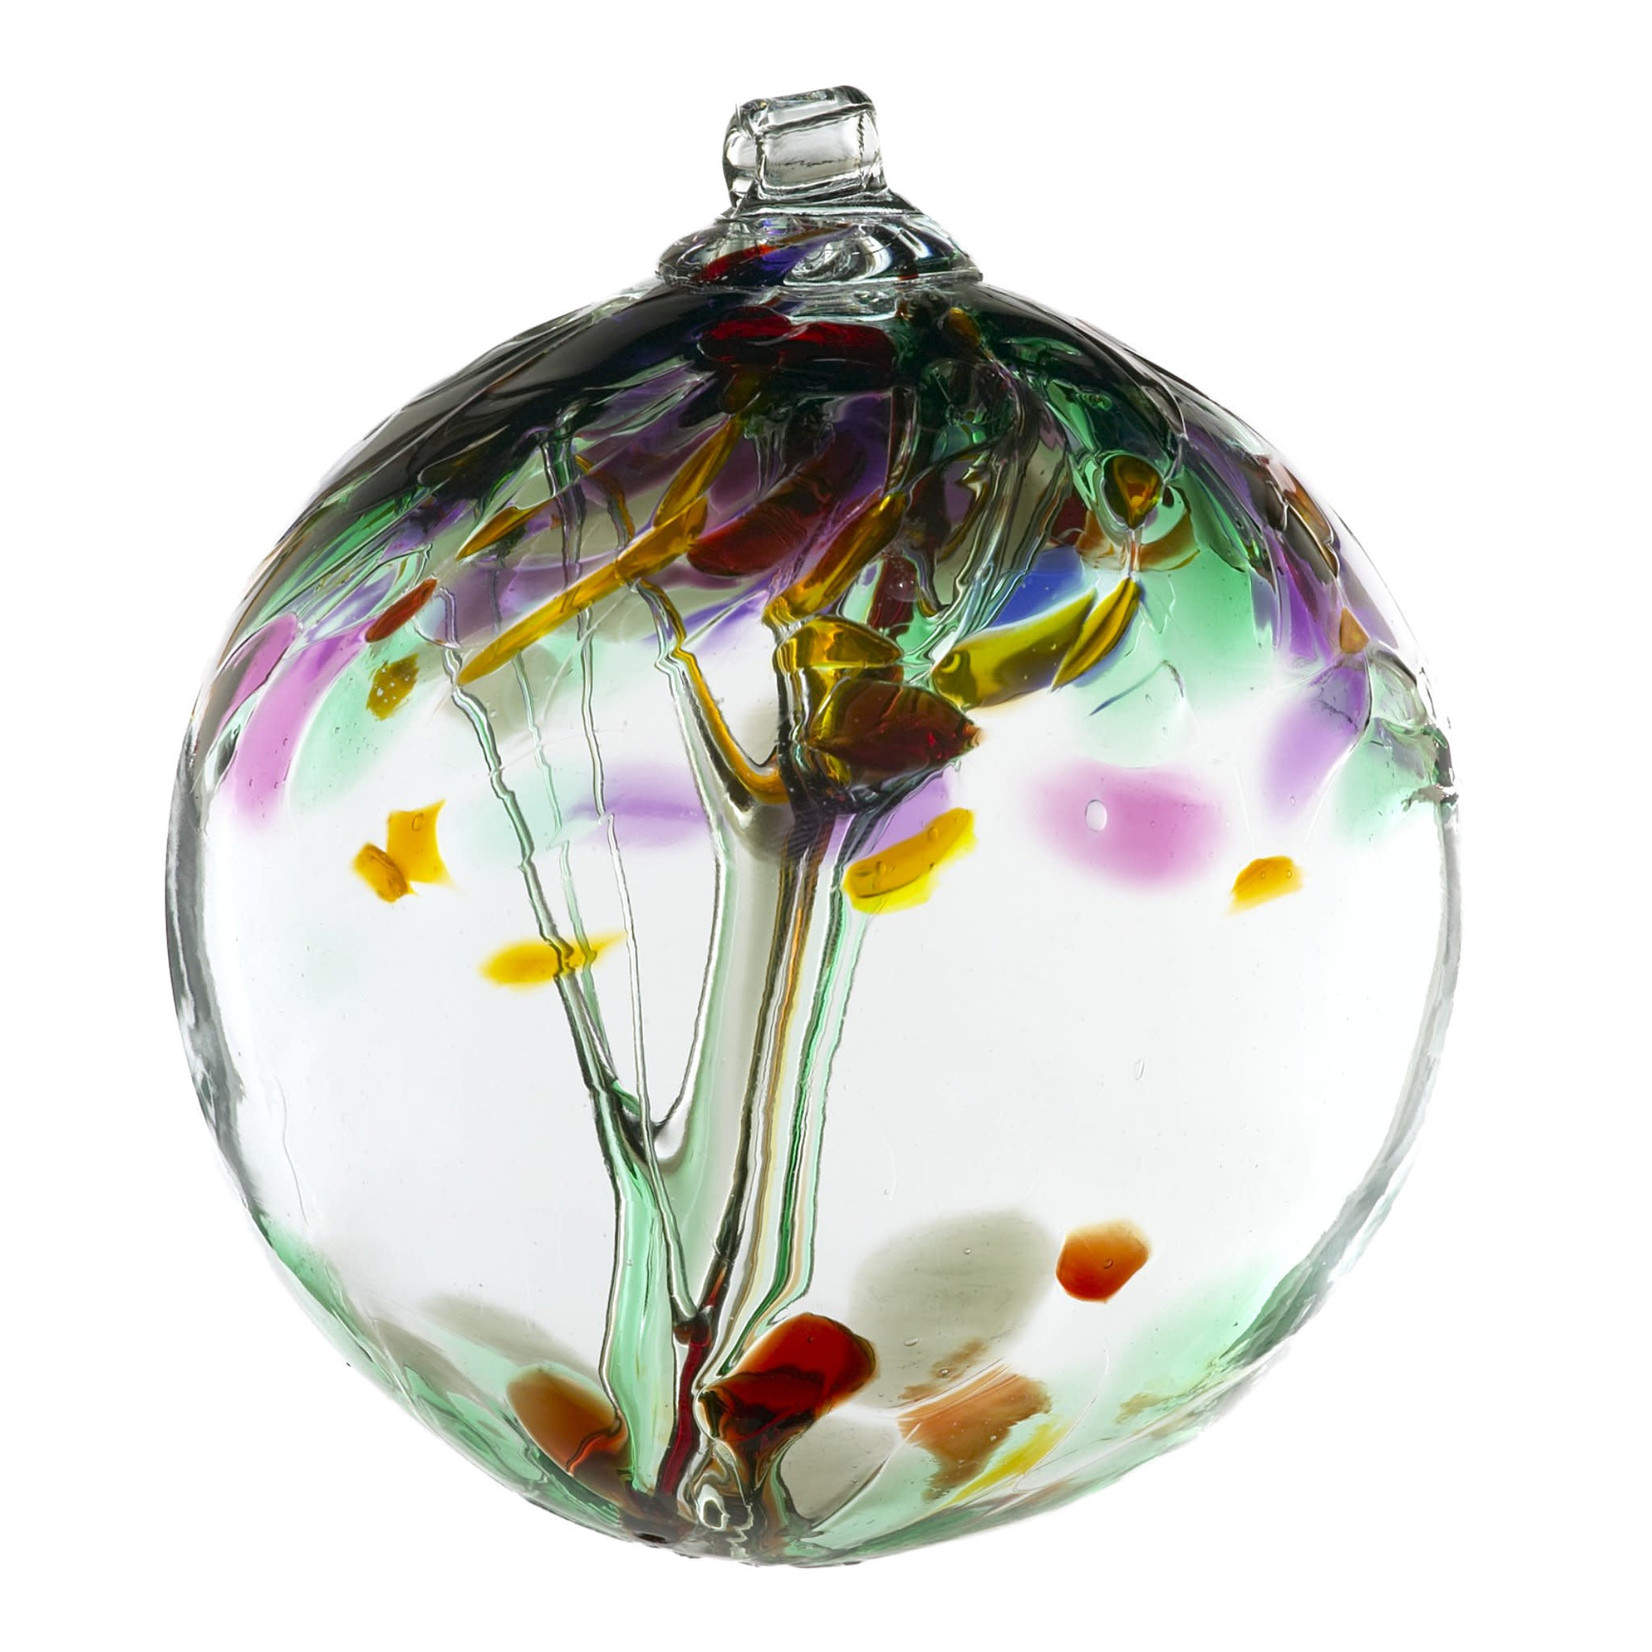 KITRAS 10" TREE OF ENCHANTMENT HANGING GLASS BALL - REMEMBRANCE